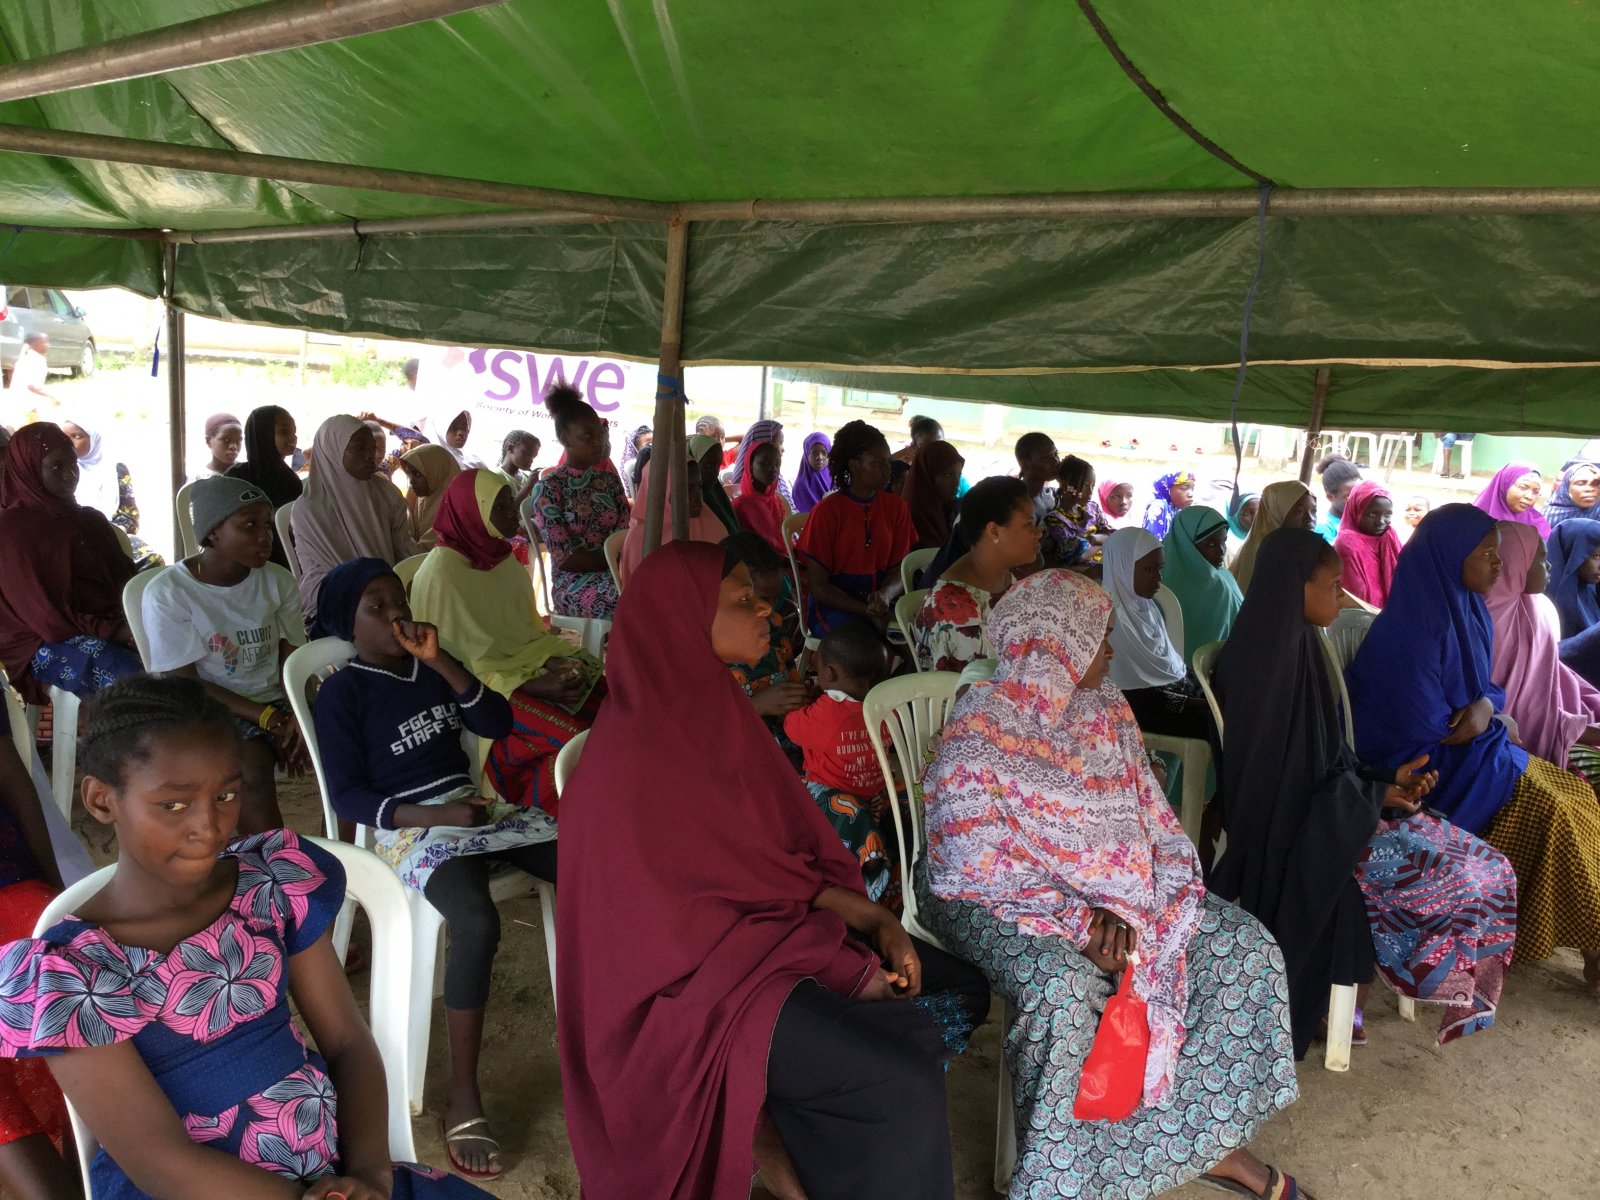 A cross section of the attendees